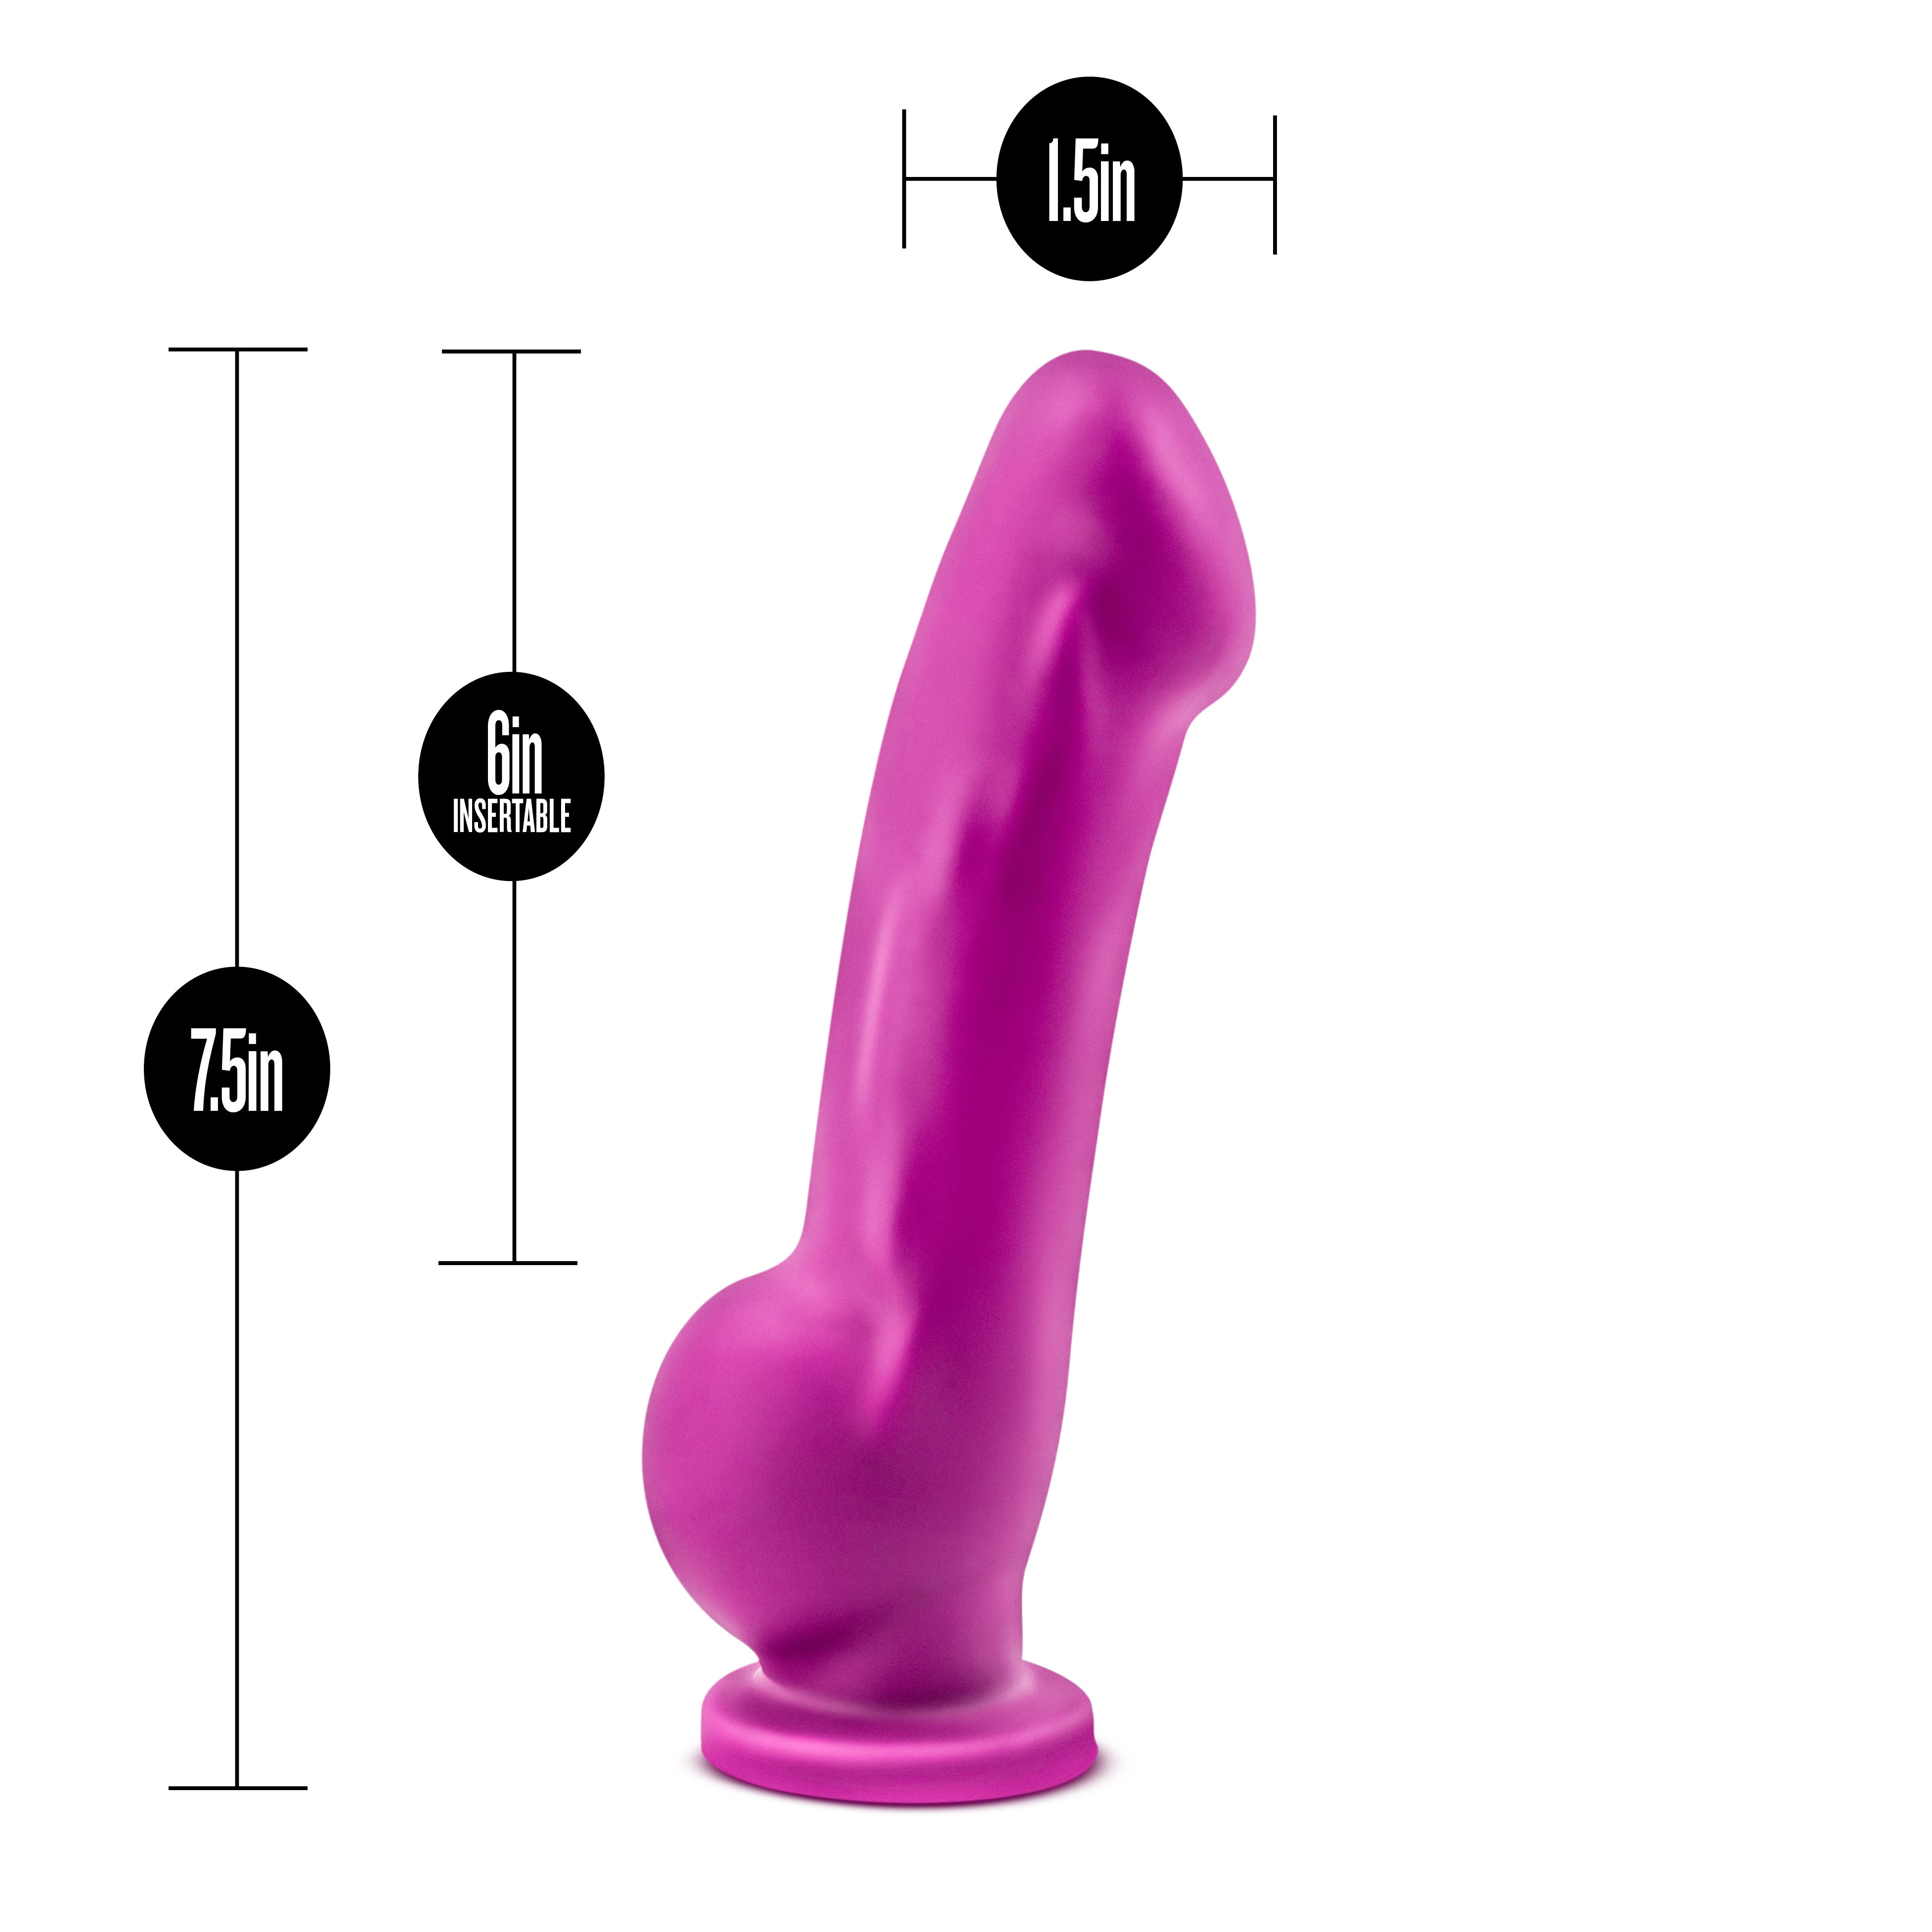 Violet dildo with dimensions